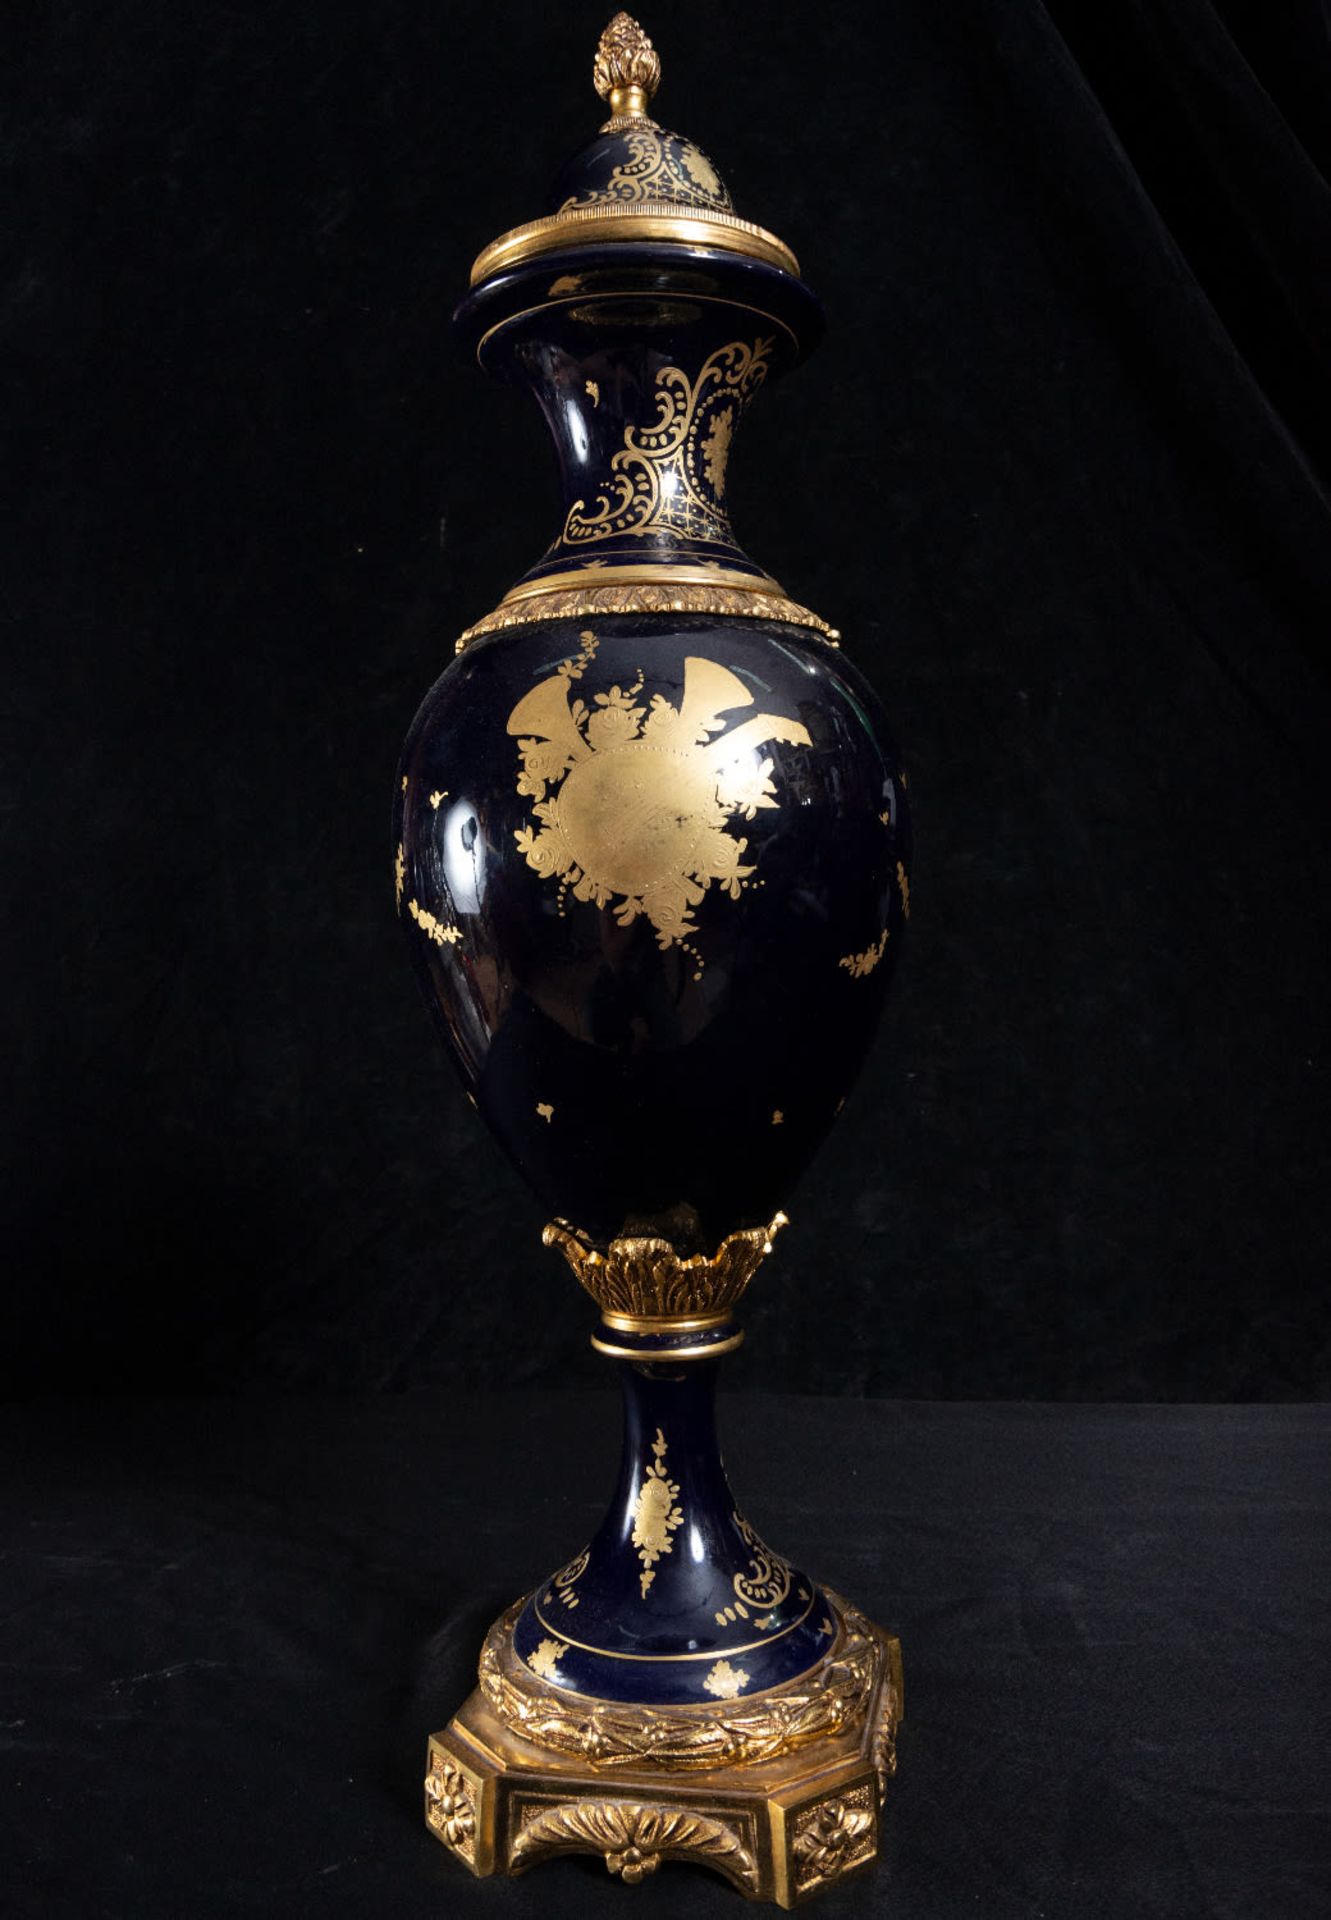 Great pair of French porcelain vases "Sevres Blue", mounted in gilt bronze, late 19th century - Image 4 of 6